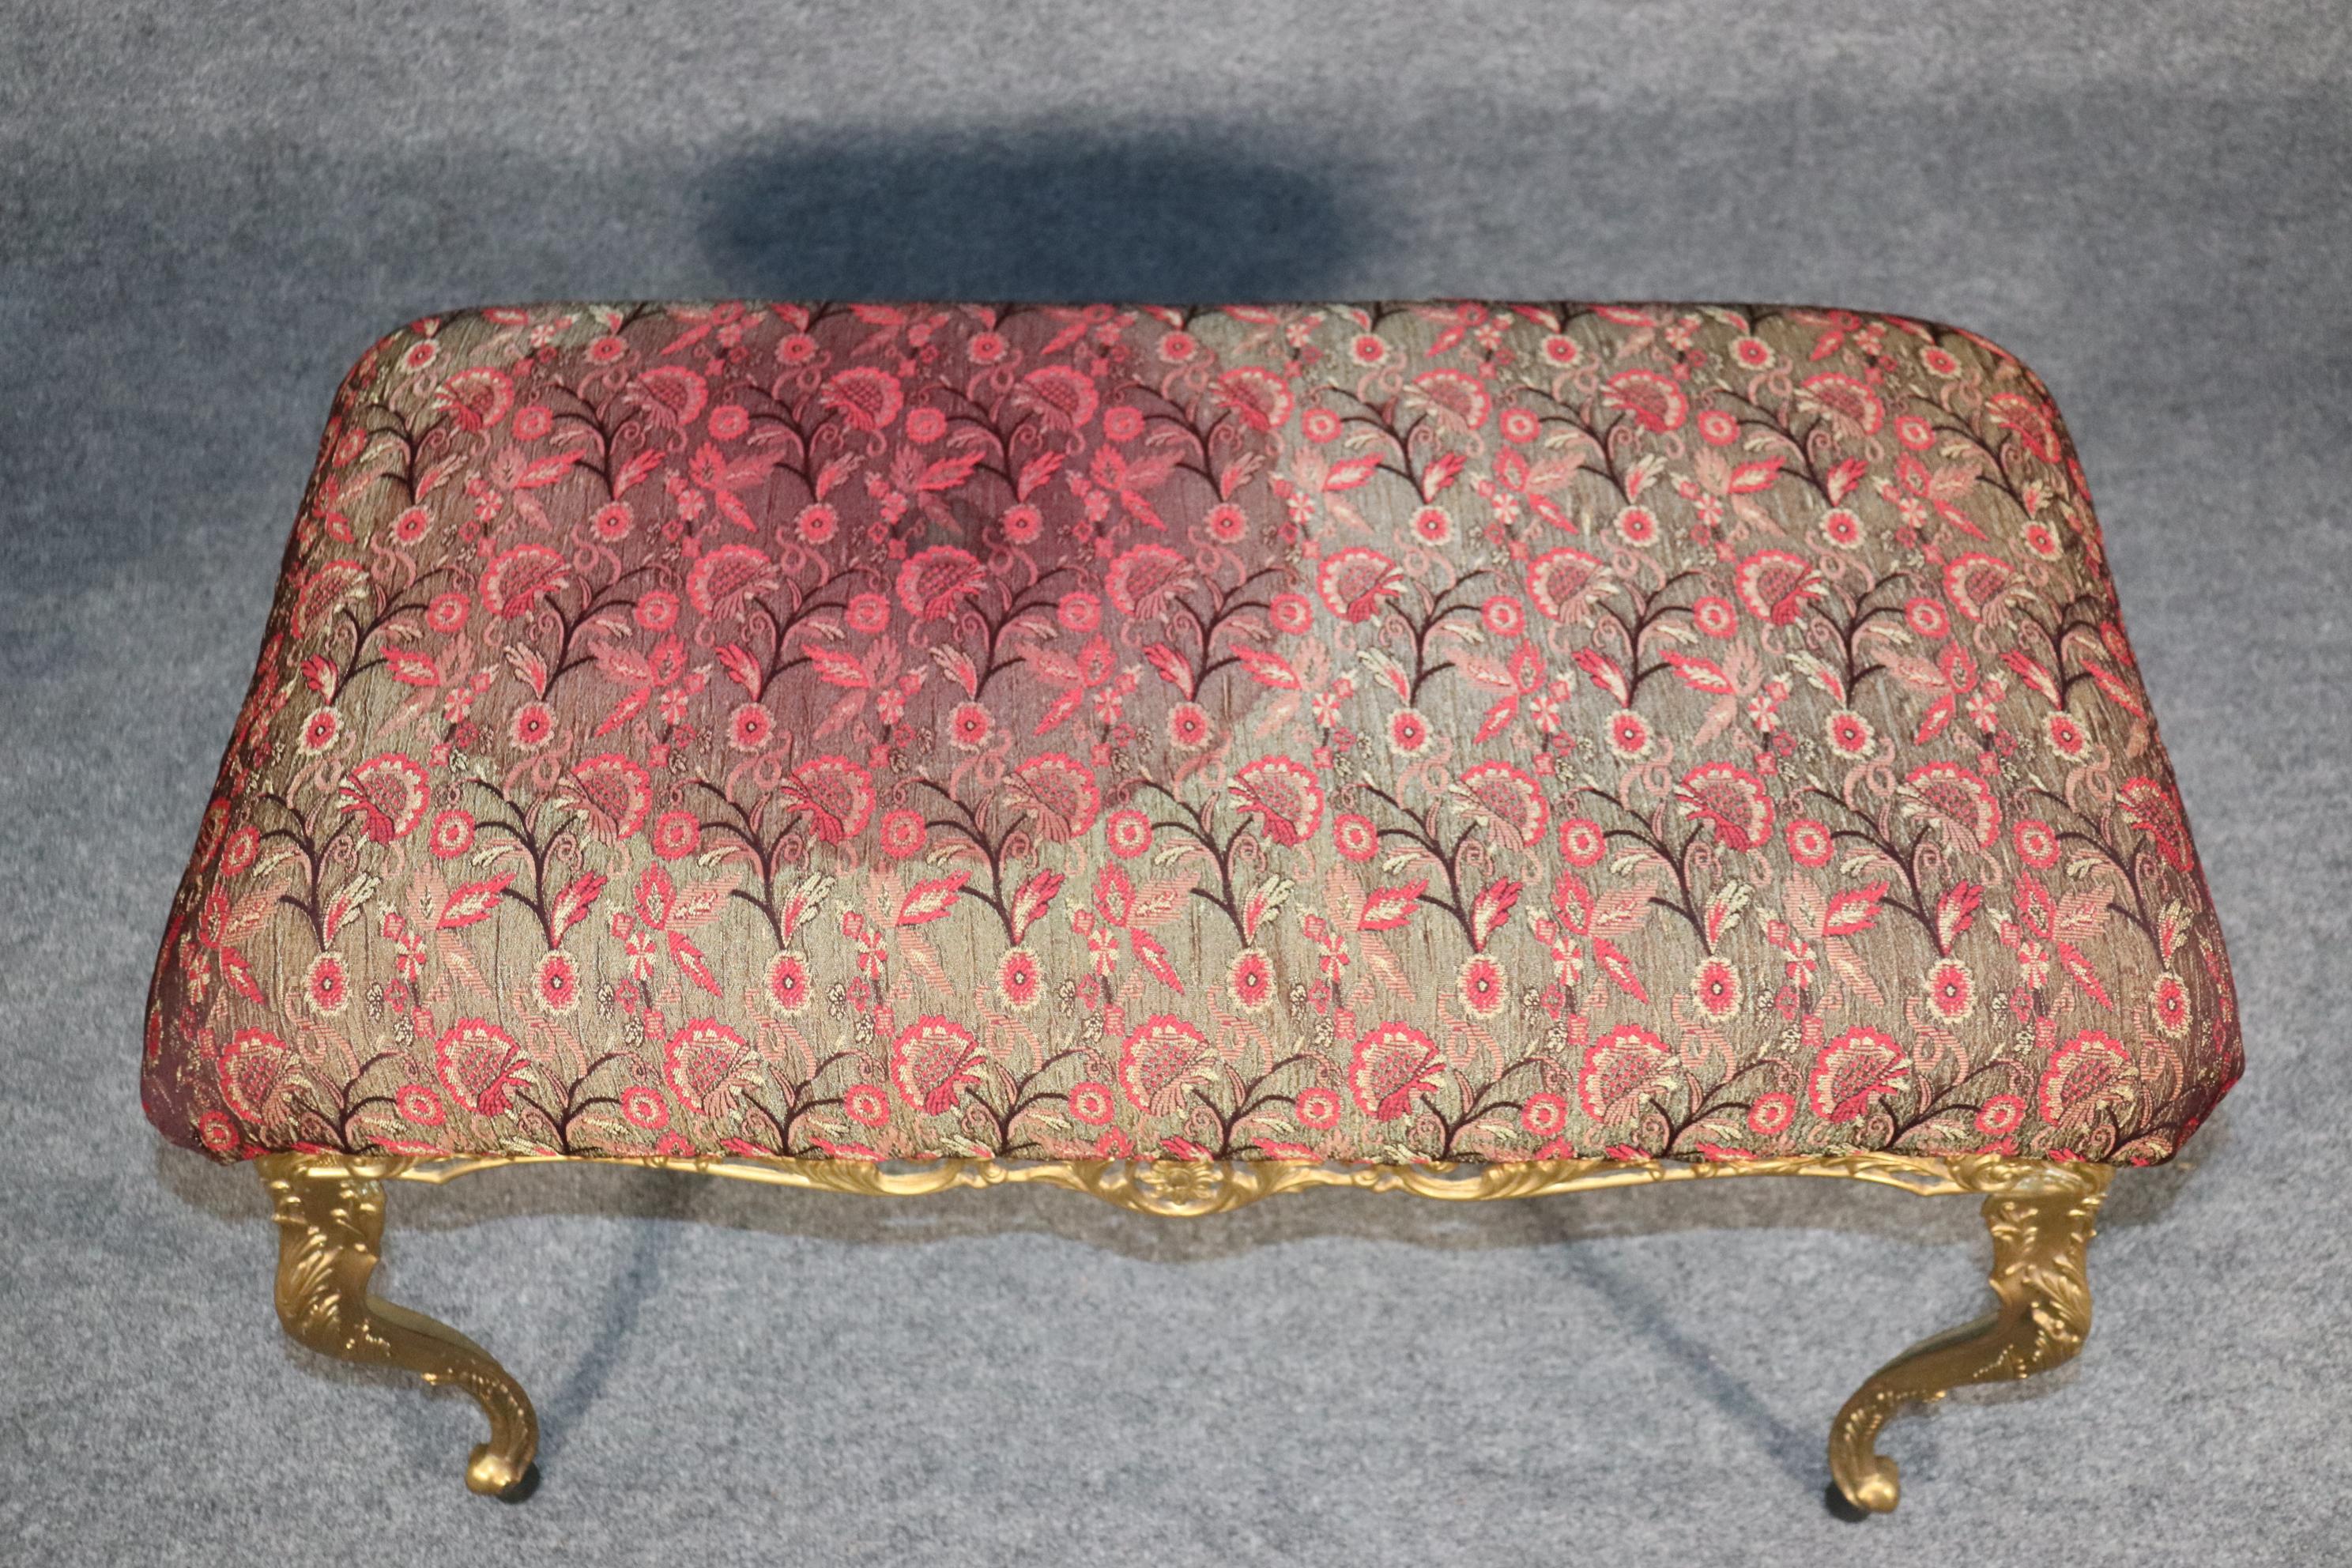 Cast Antique Vintage Upholstered Louis XV Style Brass Bench Ottoman For Sale